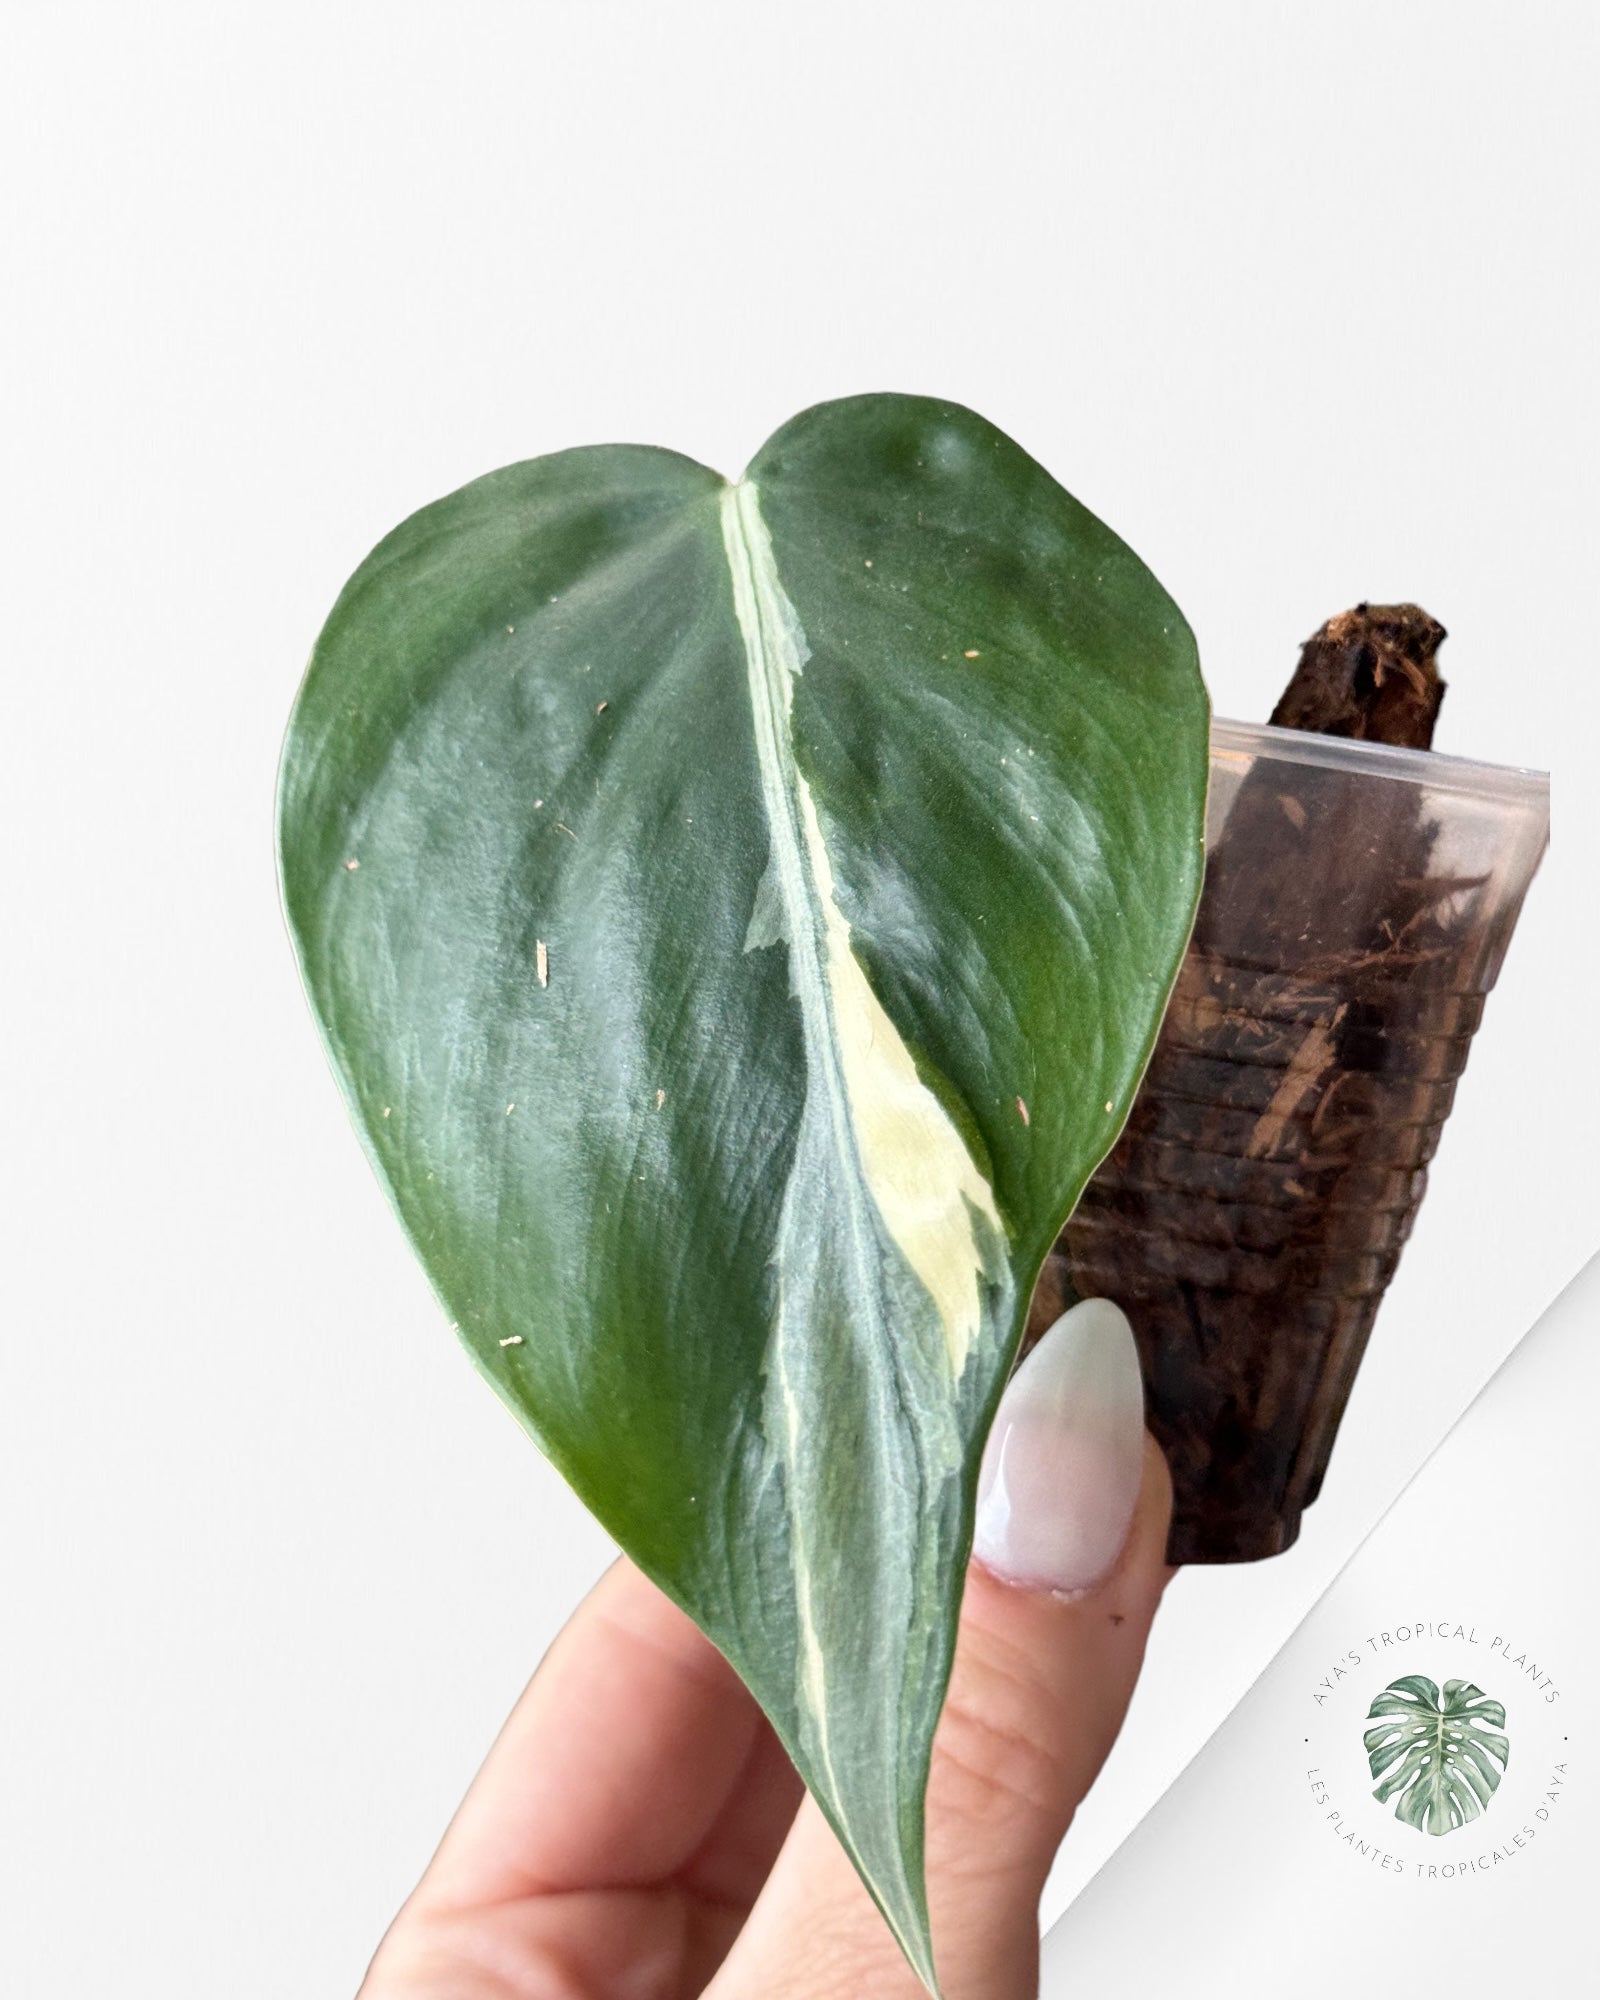 Philodendron Hederaceum 'Rio'-3020